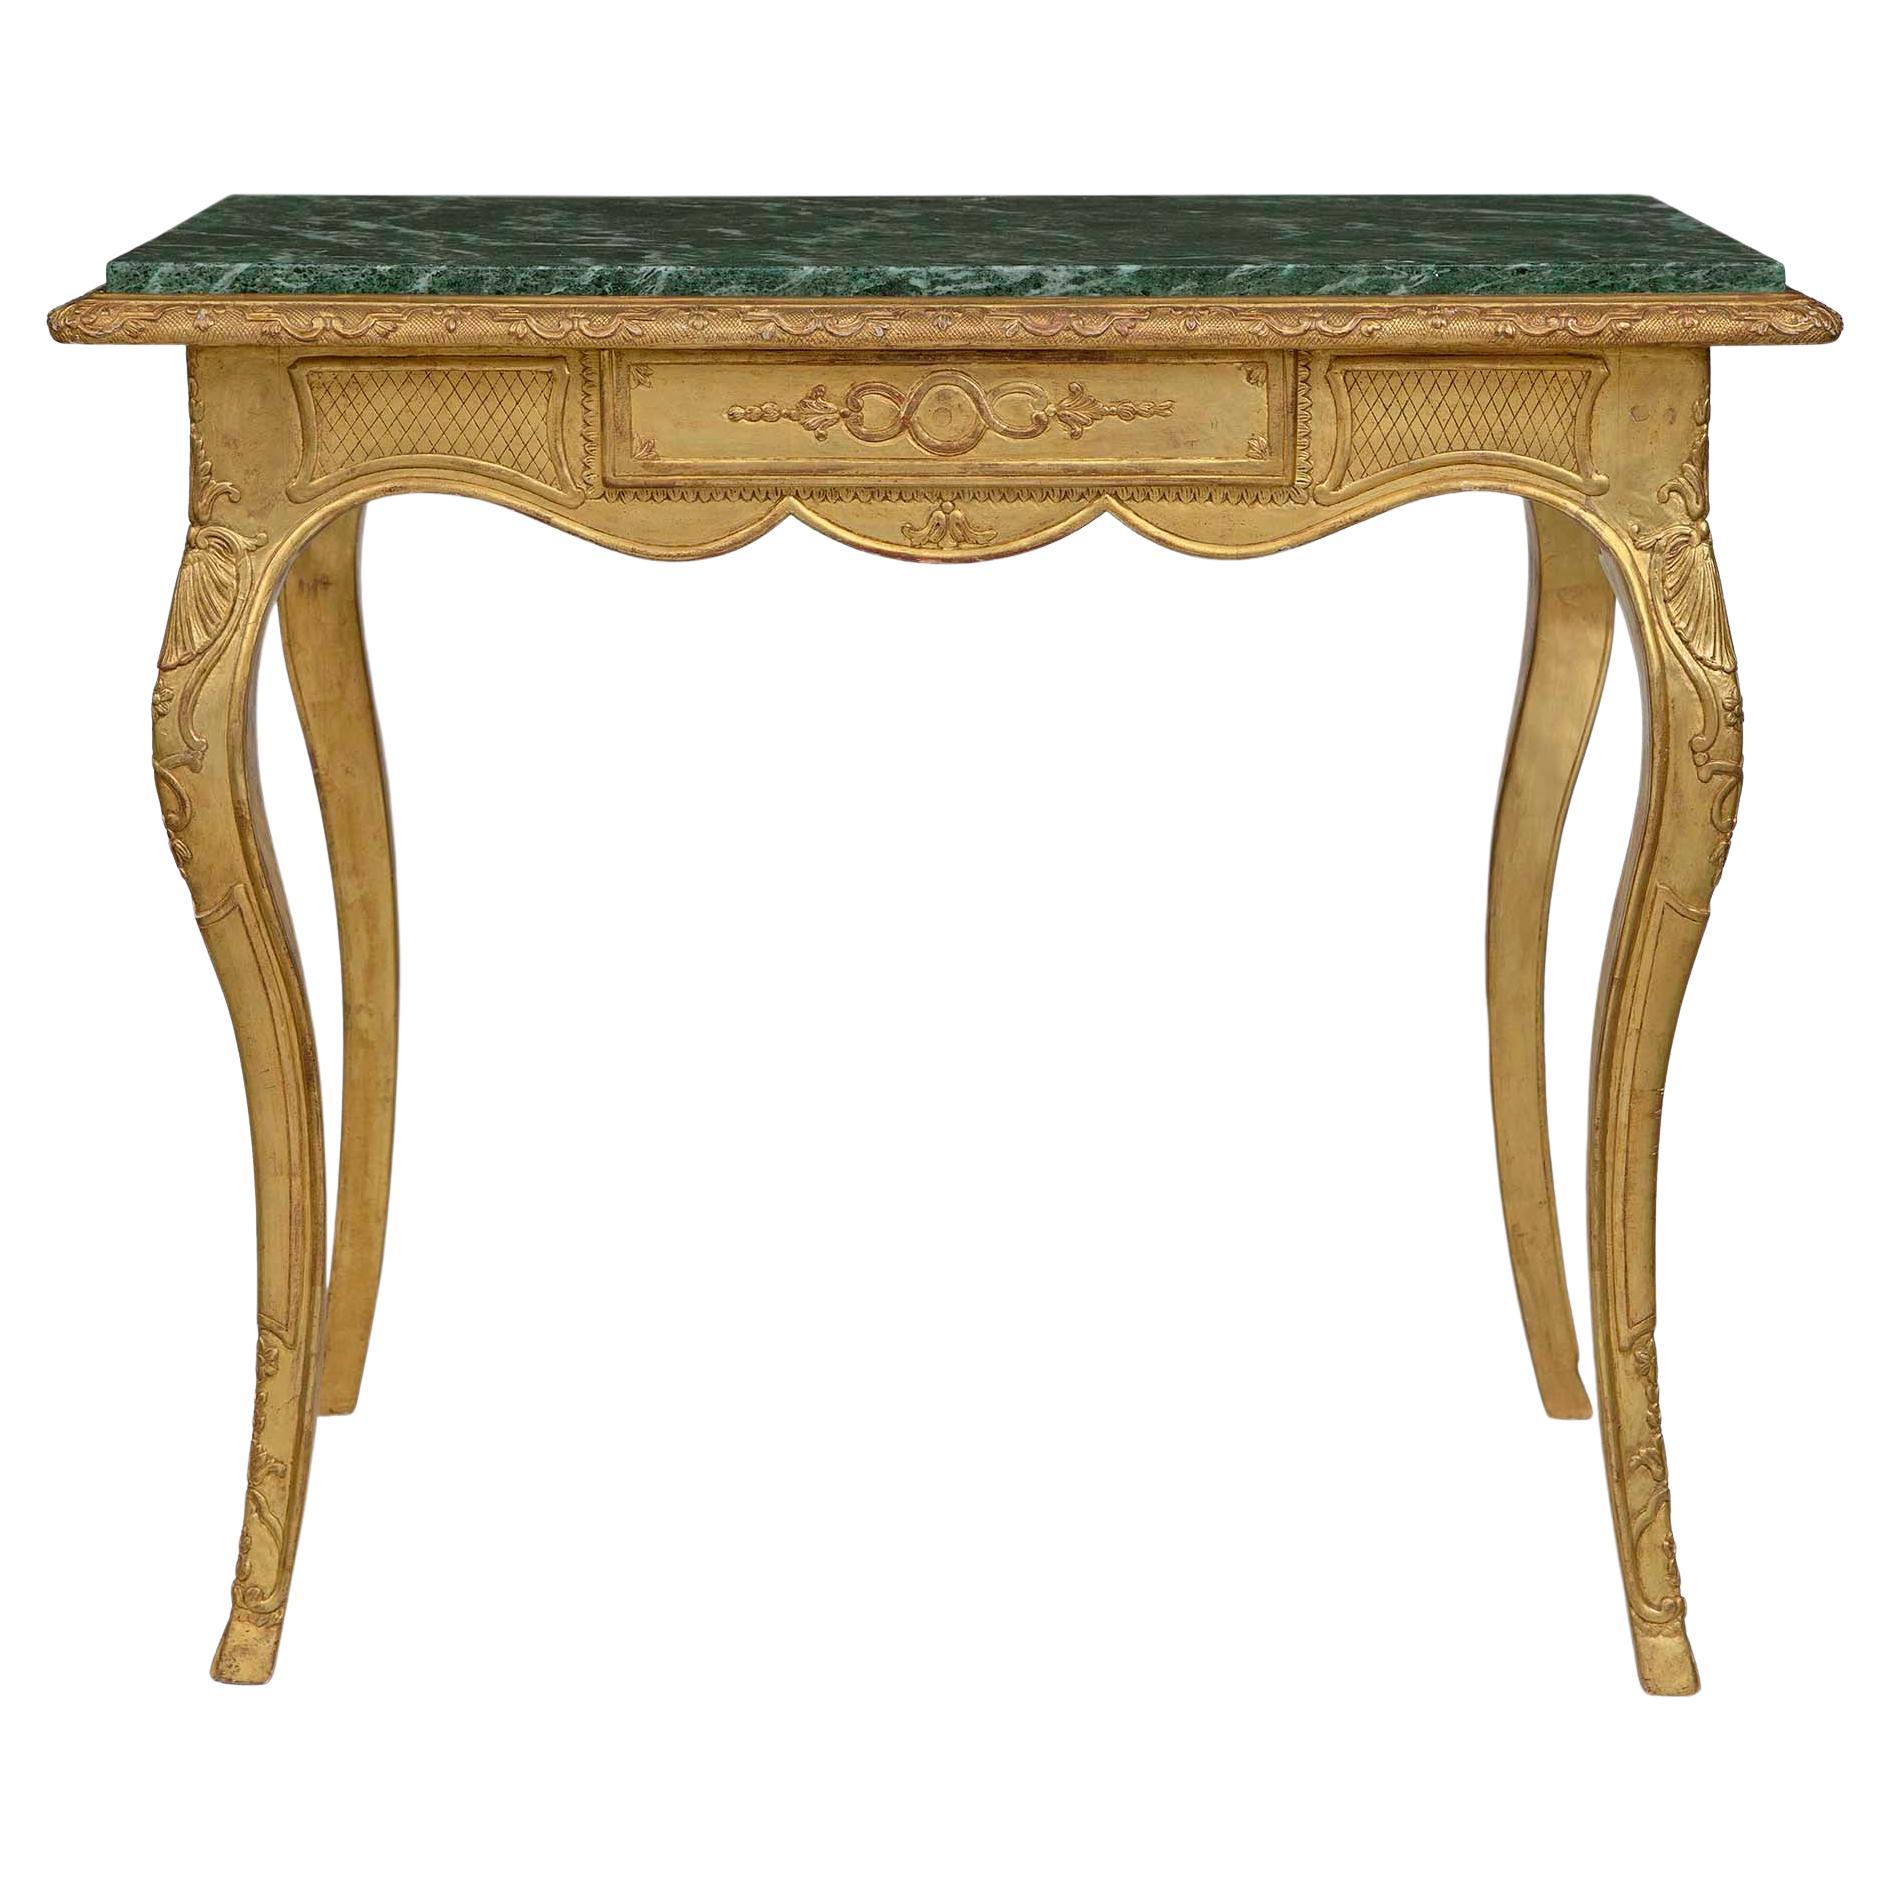 French Early 19th Century Louis XV Style Giltwood and Marble Rectangular Table For Sale